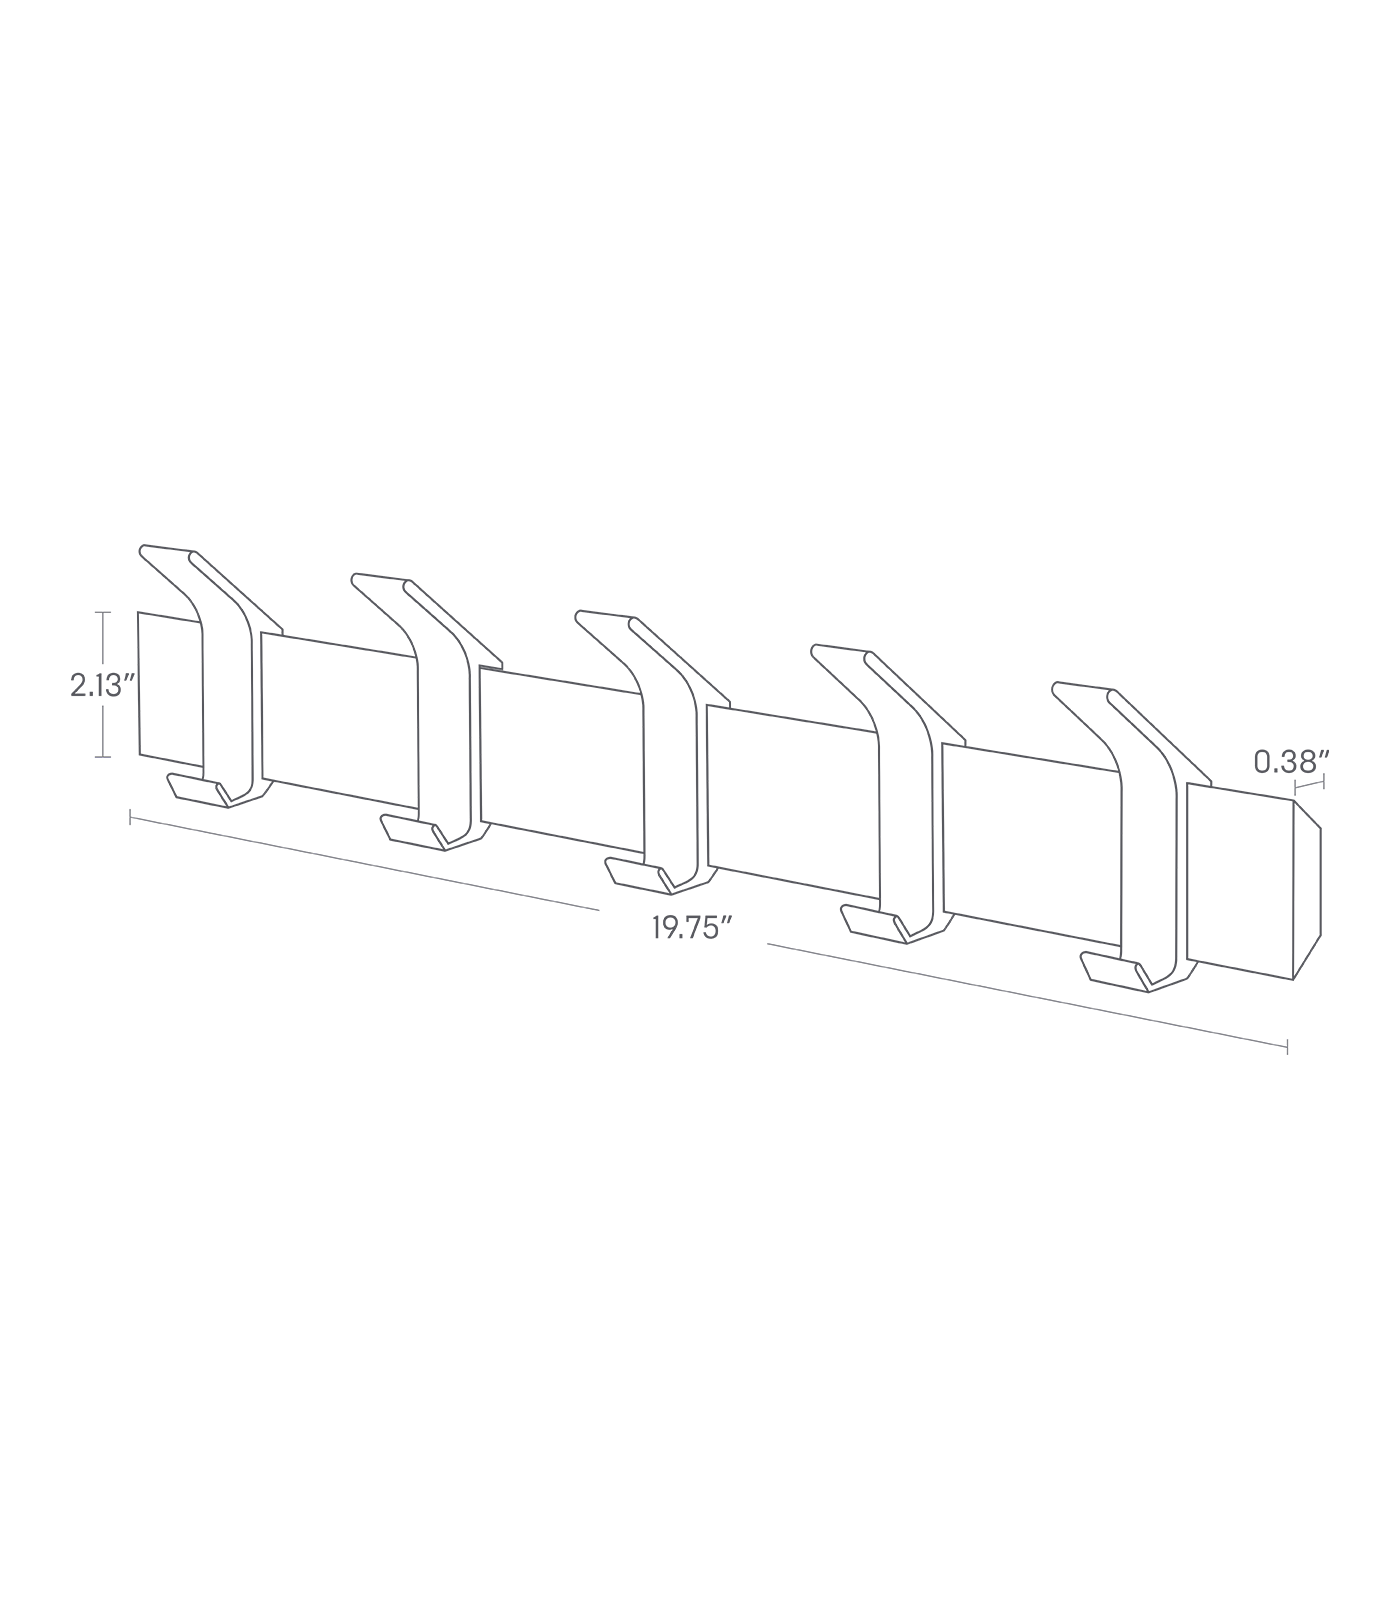 Dimenision image for Wall-Mounted Coat Rackon a white background showing total width of 19.75